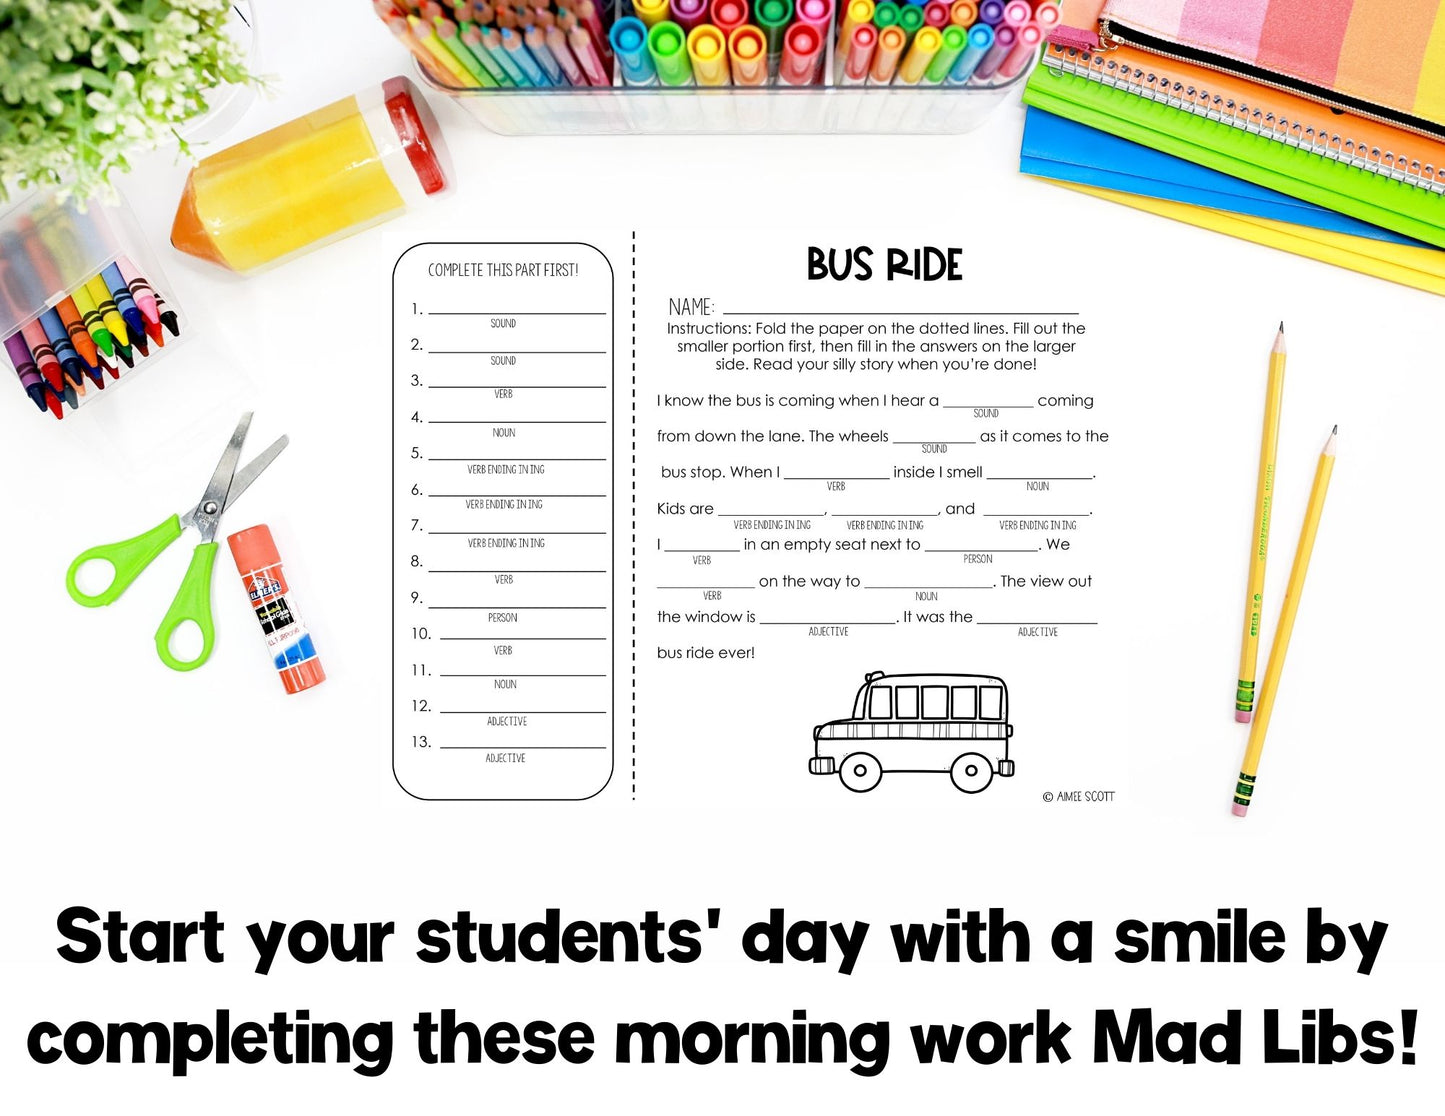 Back to School Activities | Parts of Speech | Mad Libs Game